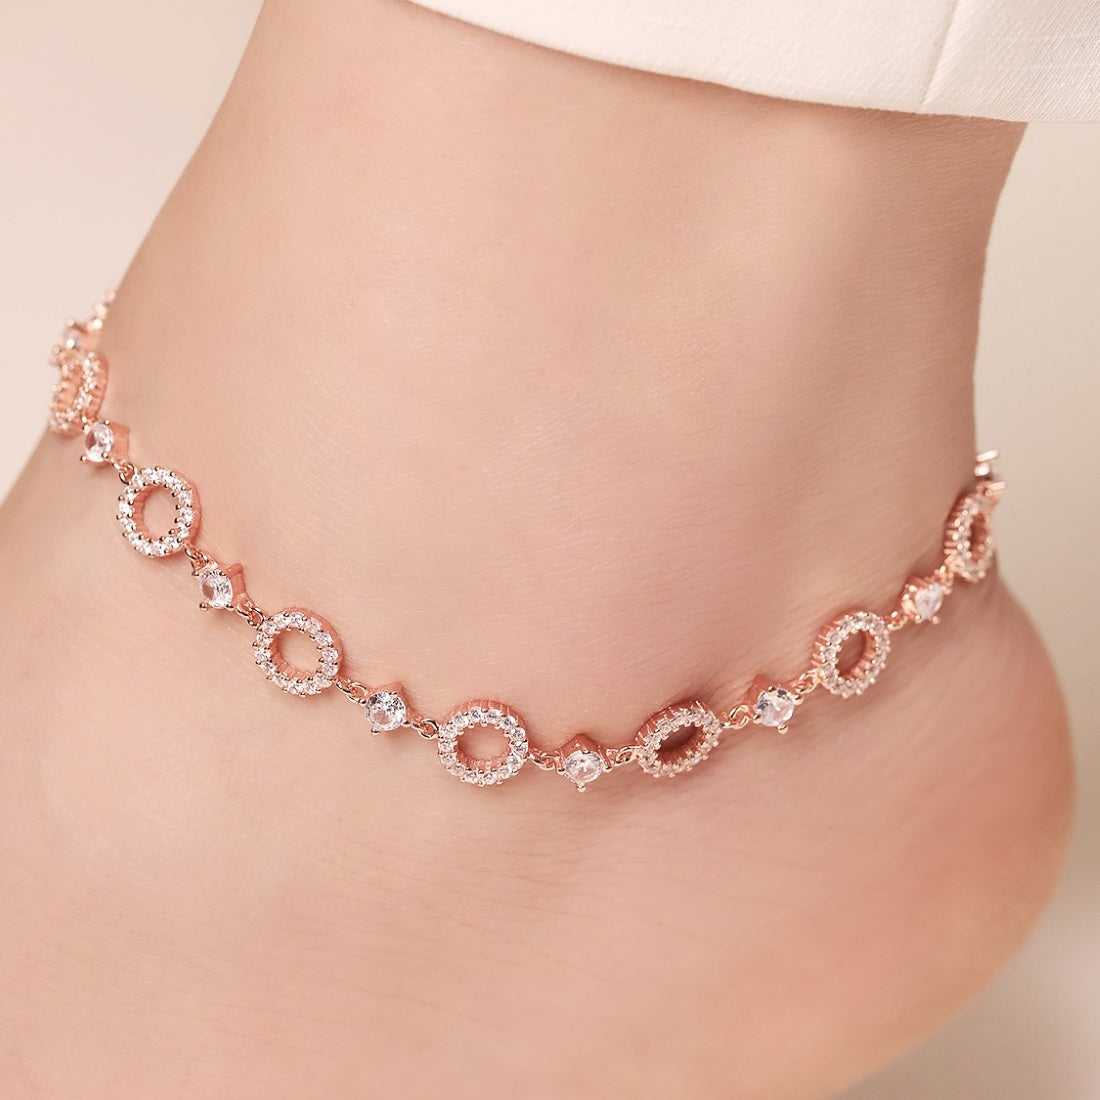 Radiant Circles 925 Sterling Silver Rose Gold-Plated Anklets